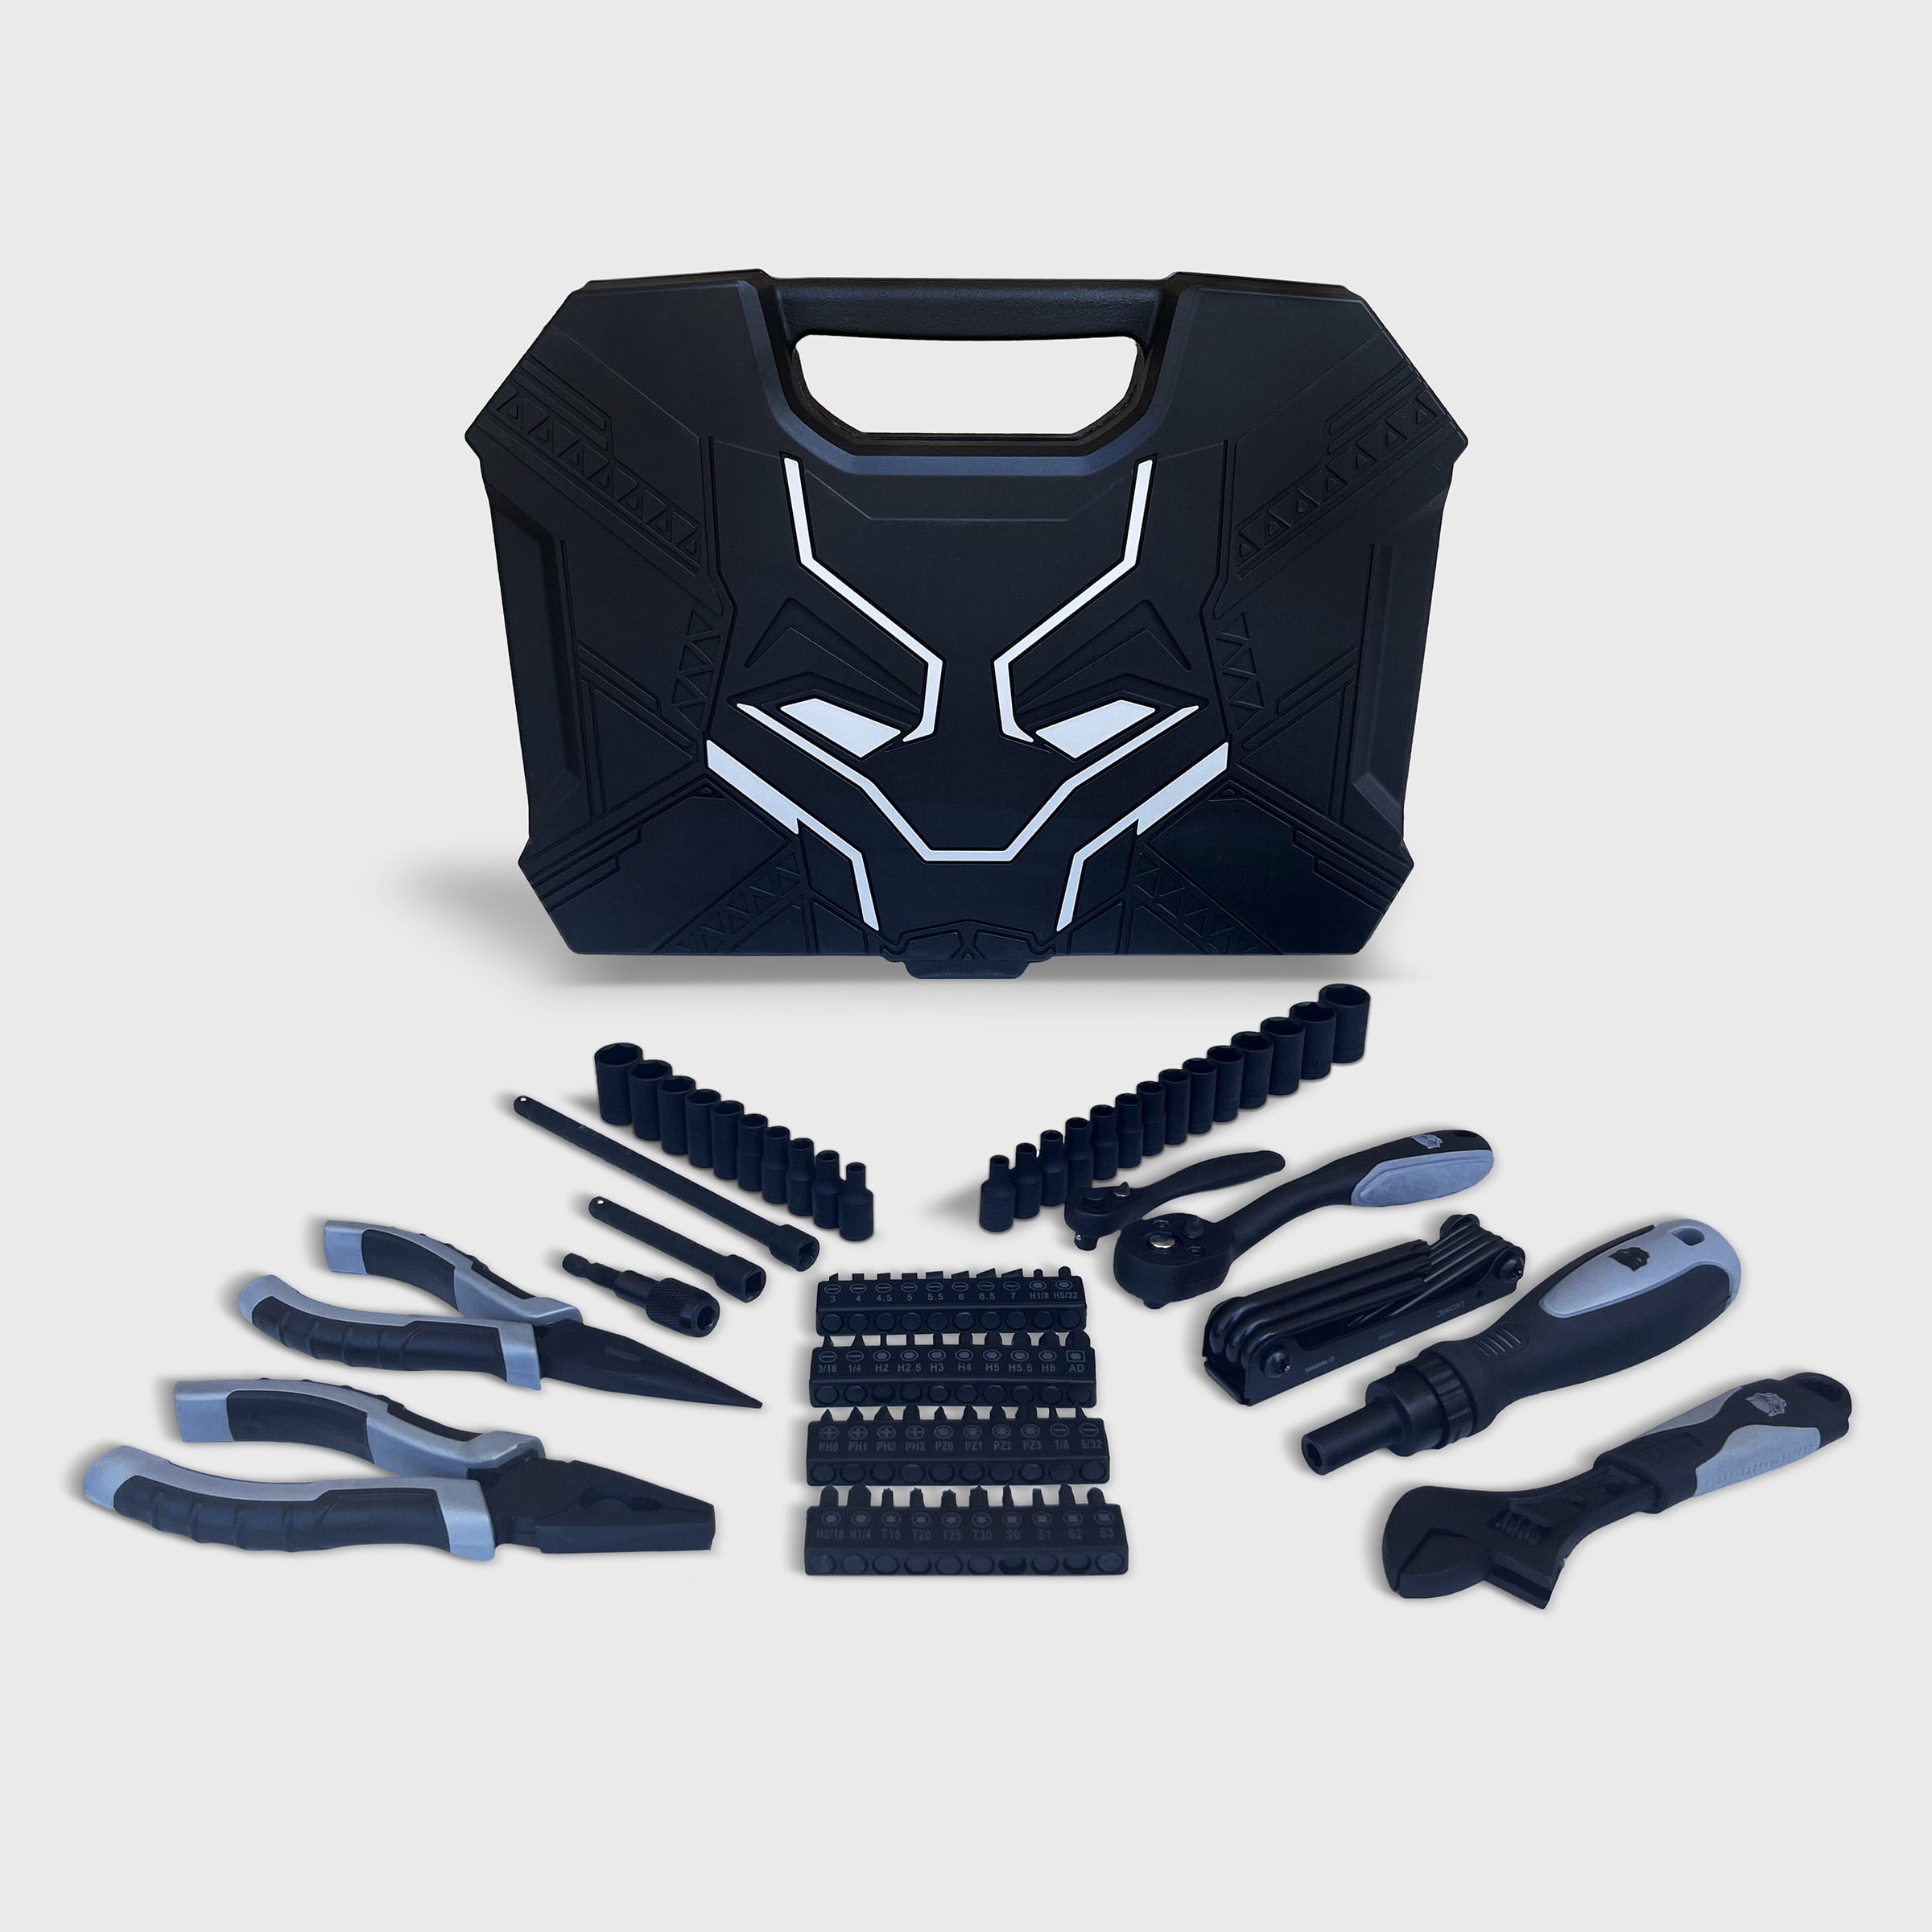 Marvel Black Panther 82pc Tool Set, Includes Ratchets, Sockets, Pliers, and Tool Case, Silver Edition